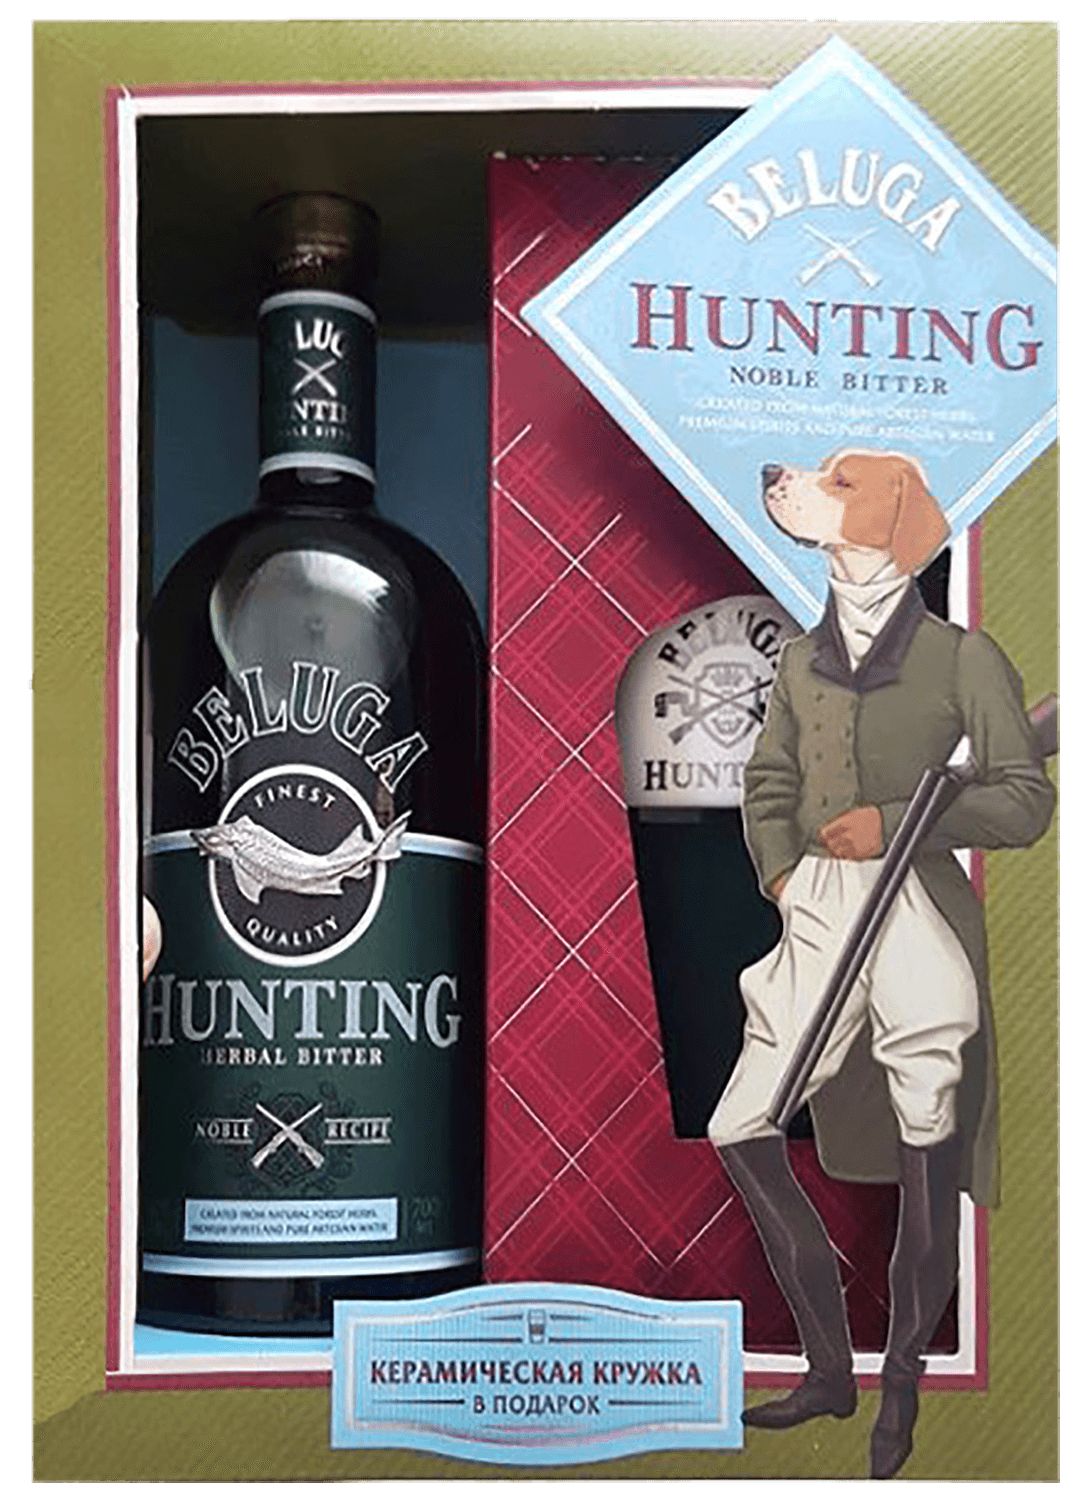 Beluga Hunting Herbal Bitter (gift box with a flask) personalized flask leather flask groomsman gift father s day gift anniversary gift wedding hip flask